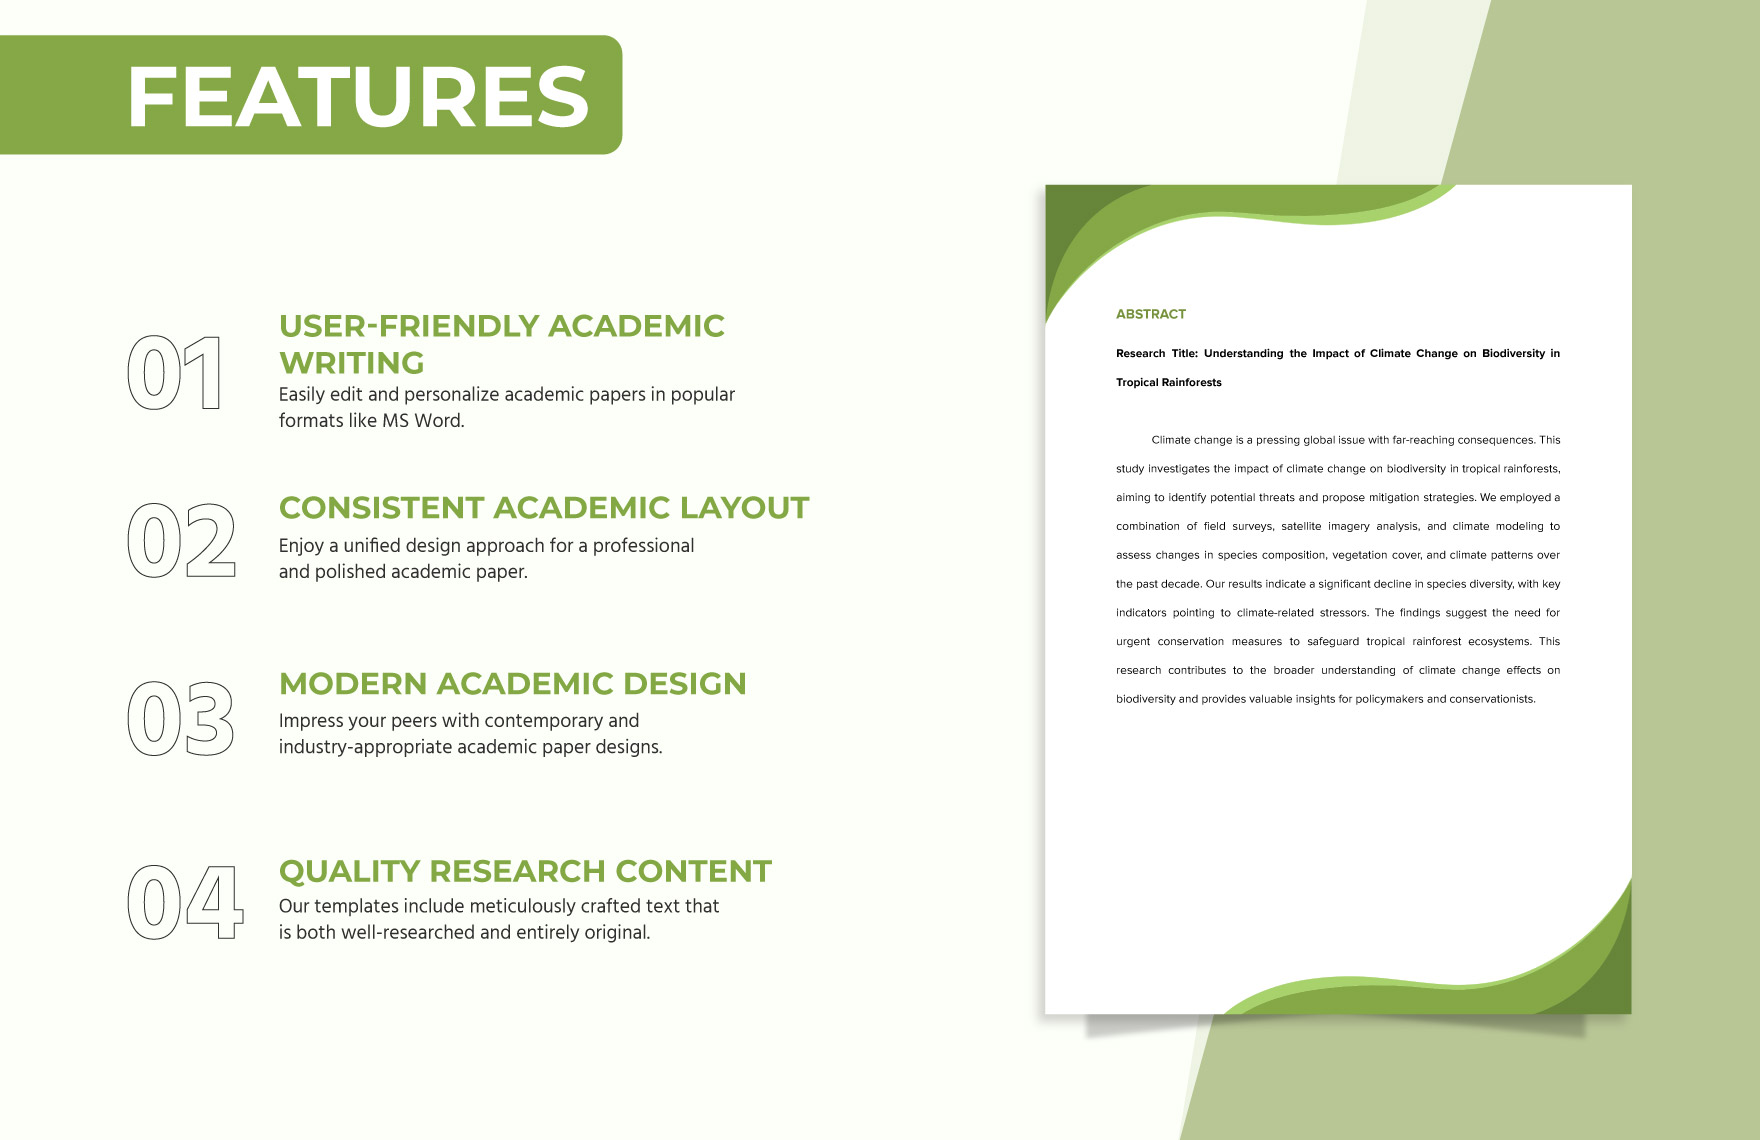 Abstract Academic Paper Template